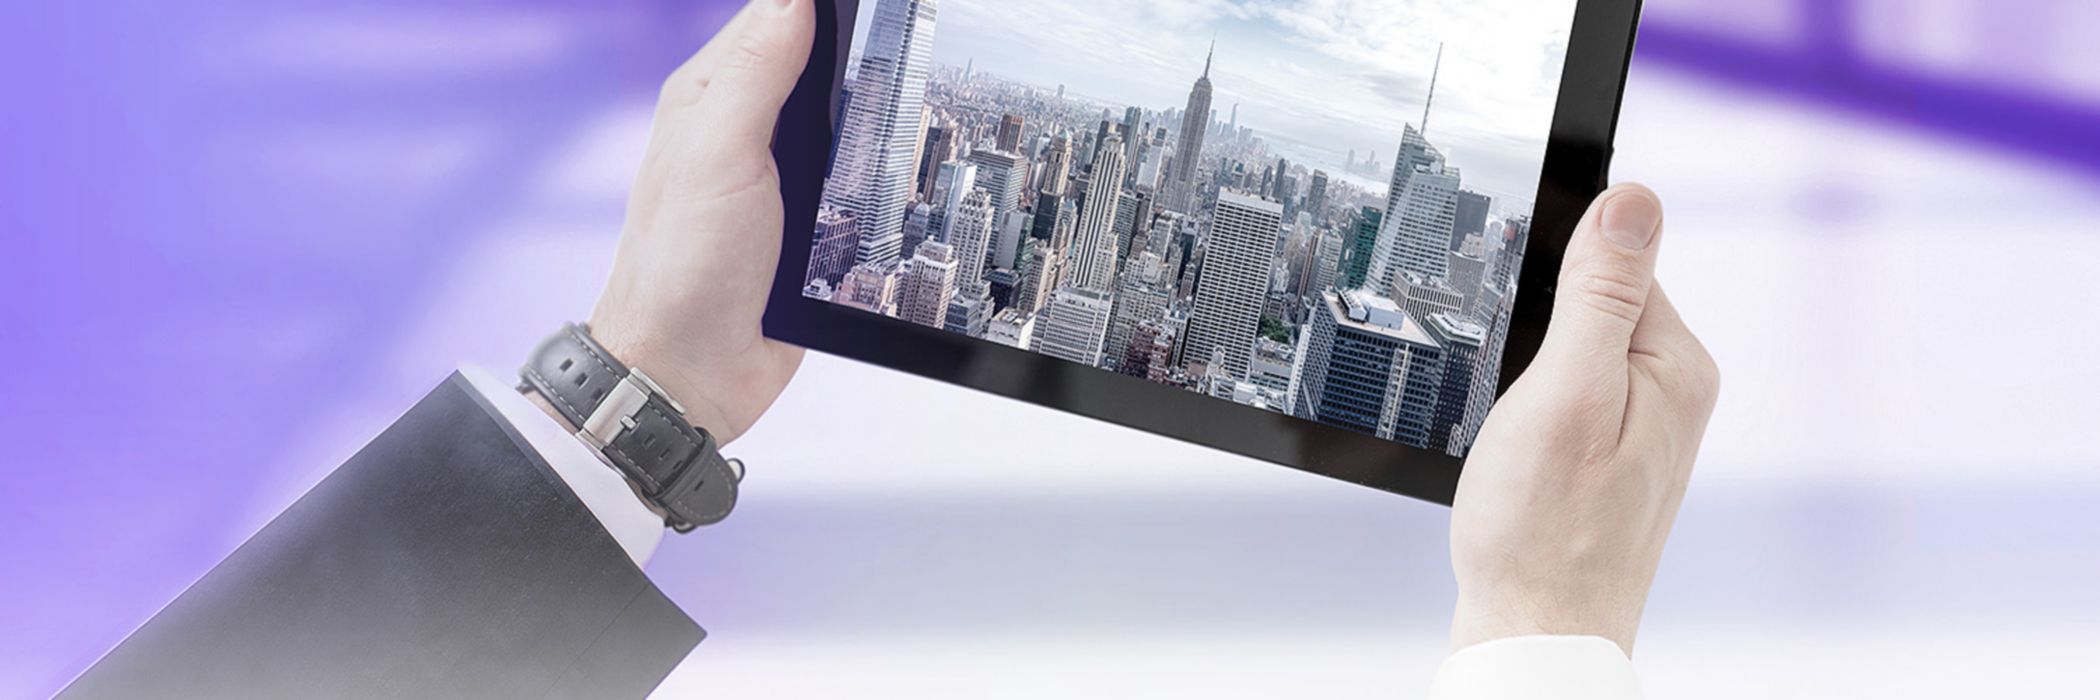 Hands holding tablet showing a skyline